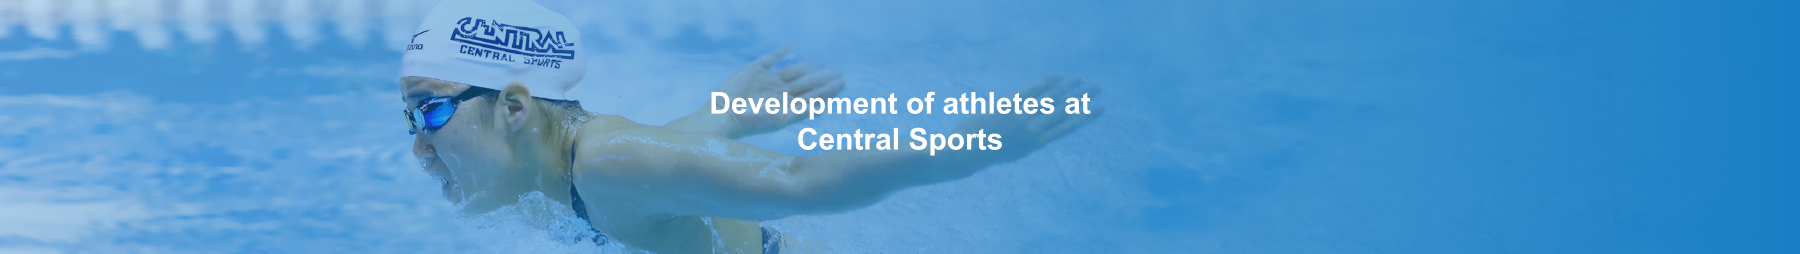 Development of athletes at Central Sports